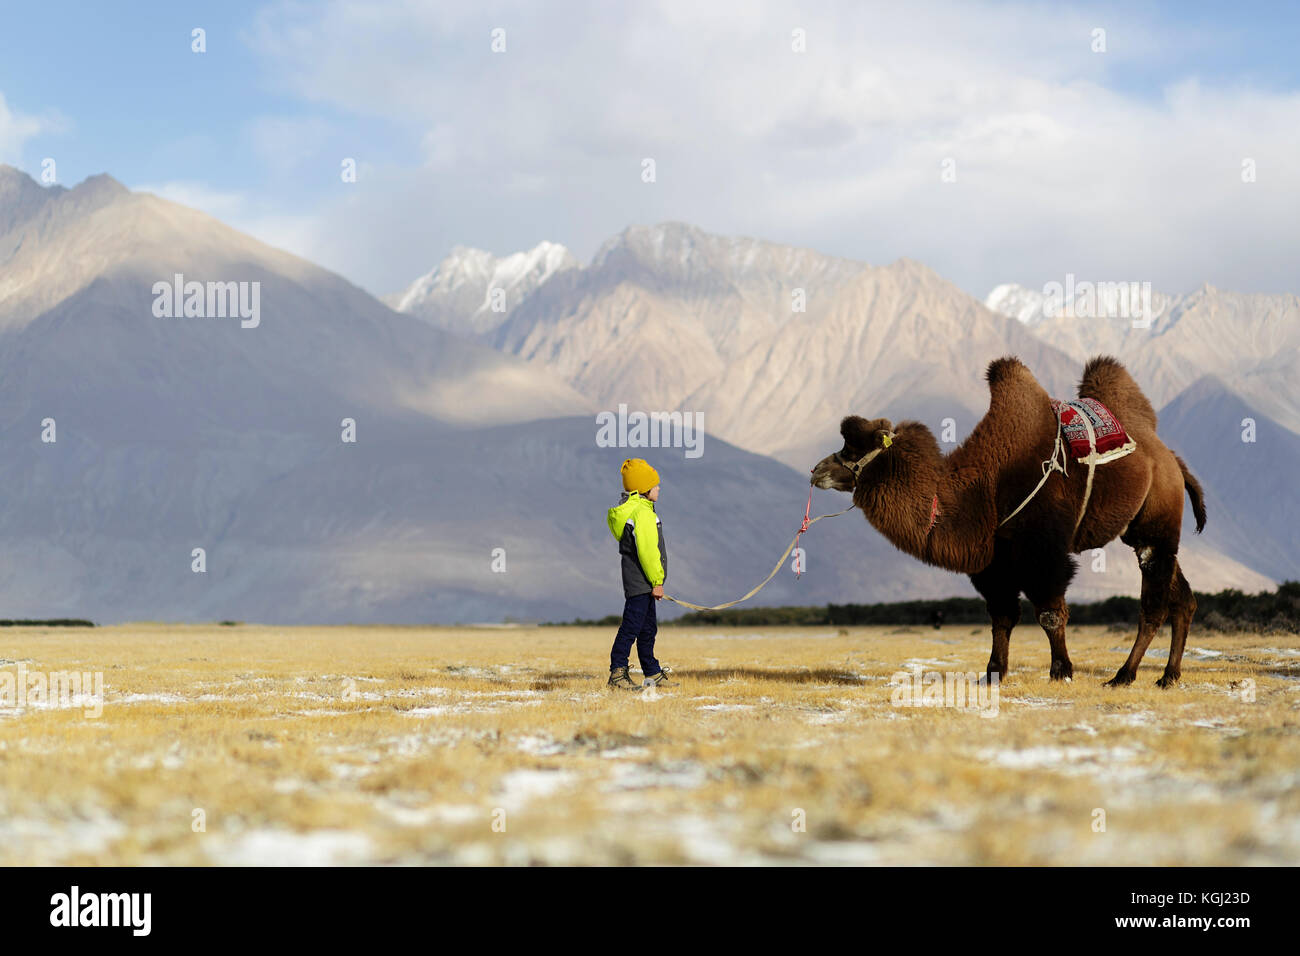 A western young boy riding a two hump camel in Nubra valley, Ladakh, Jammu and Kashmir, India. Stock Photo